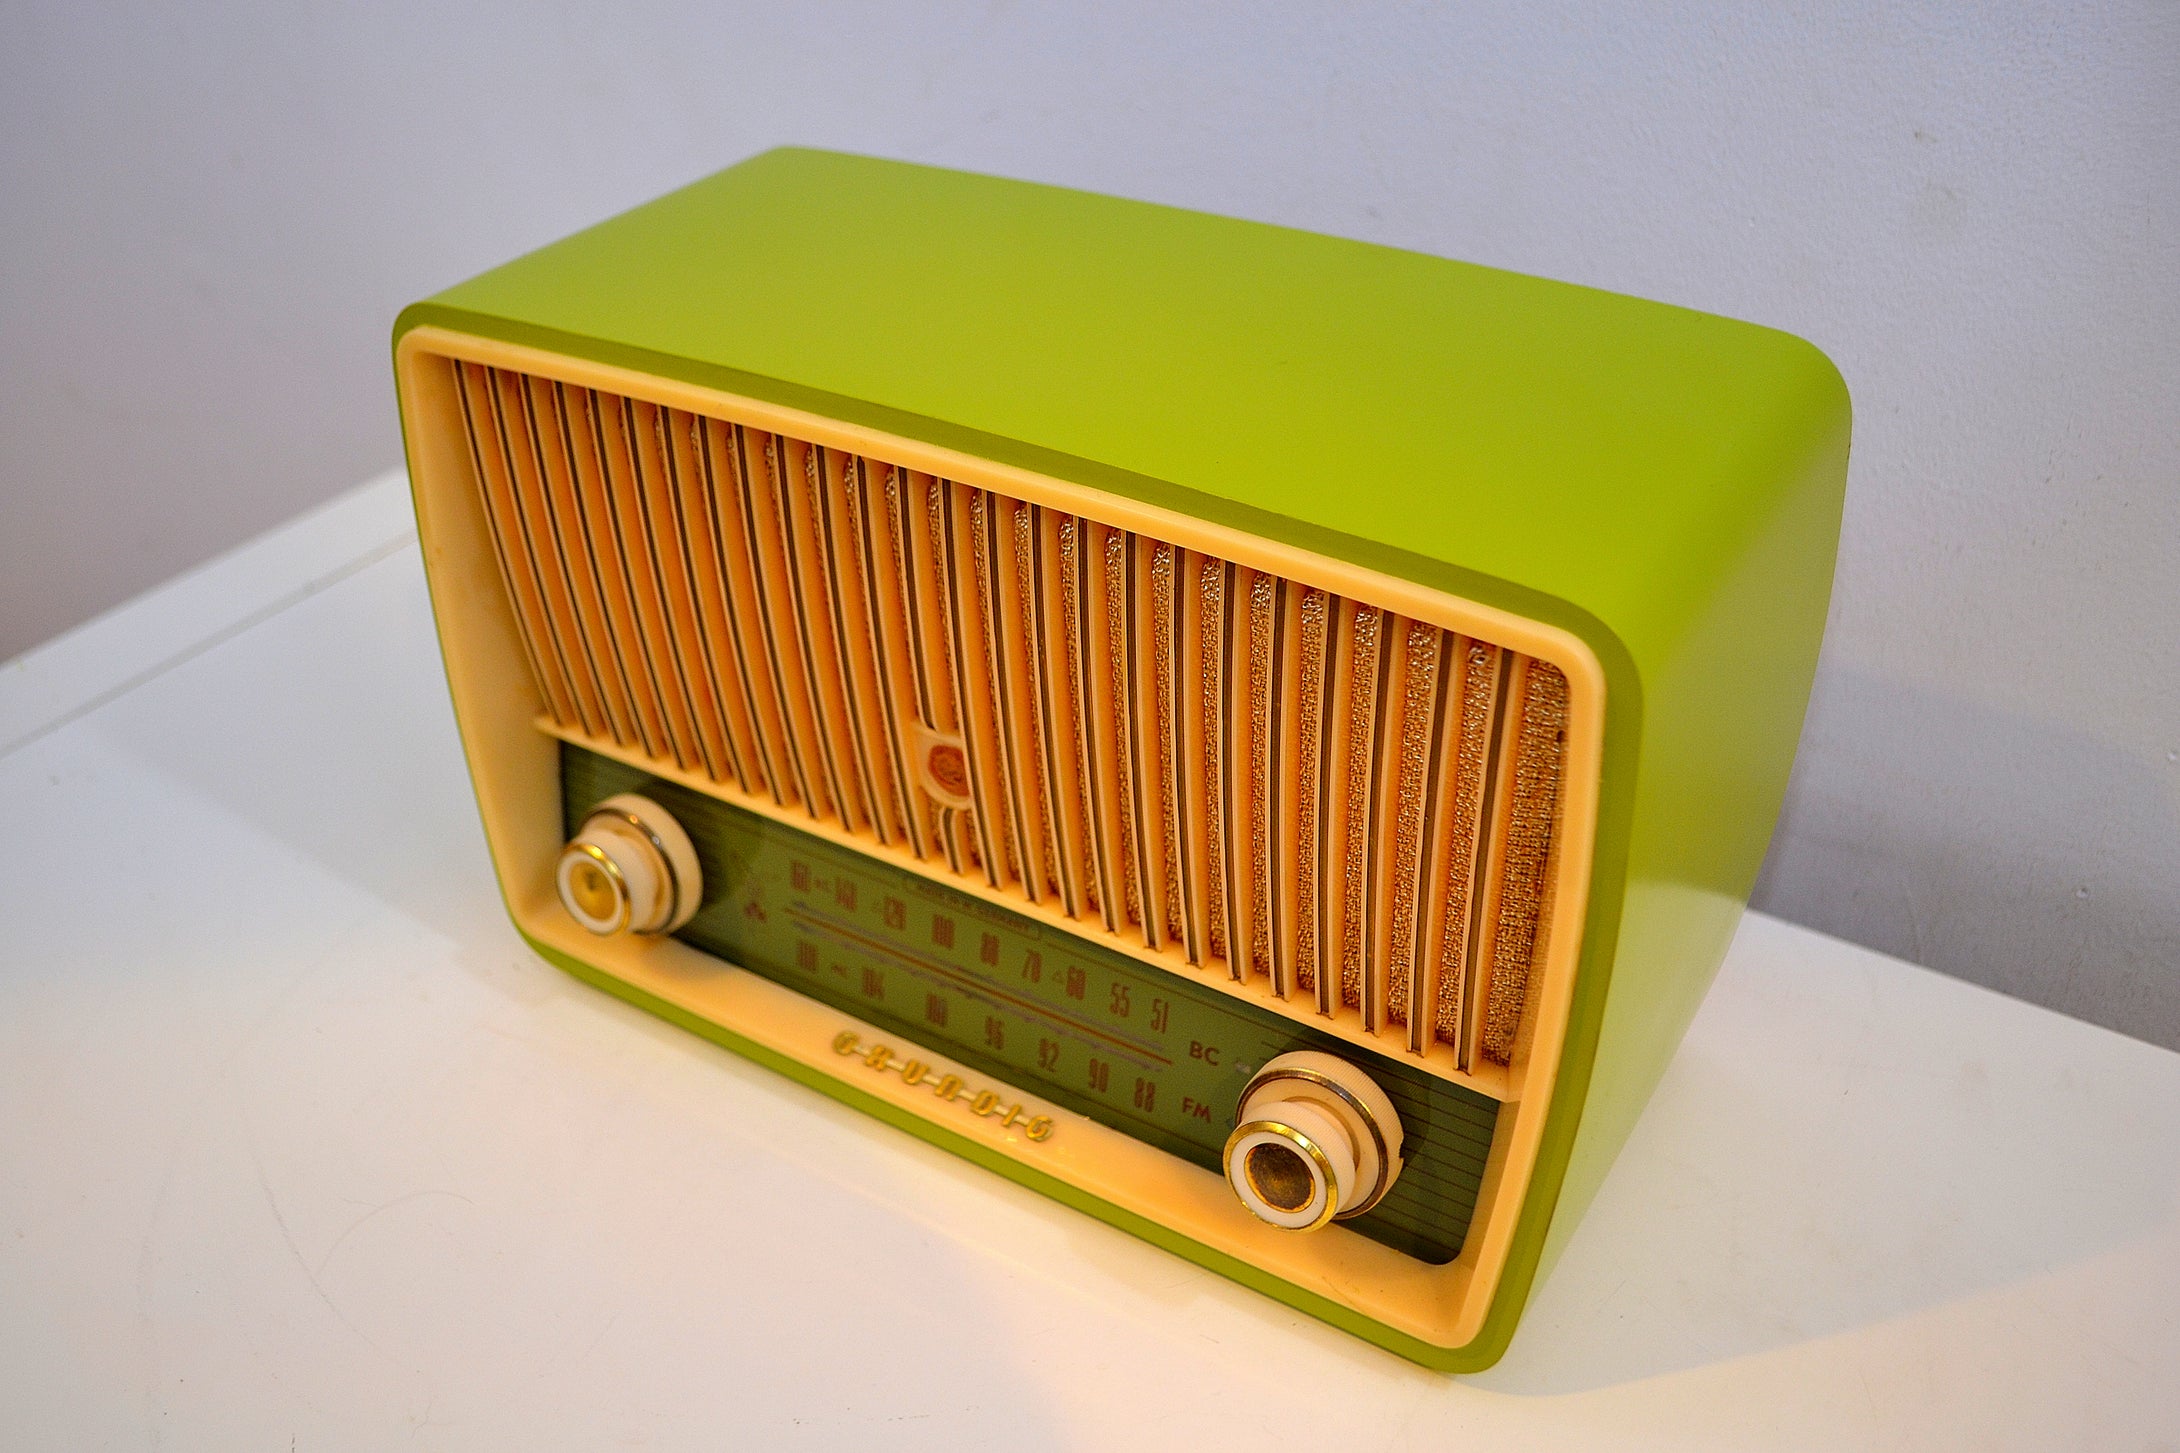 Lime Green West German Made 1956 Grundig Model 85 Vacuum Tube Radio Rare and Beautiful Condition!